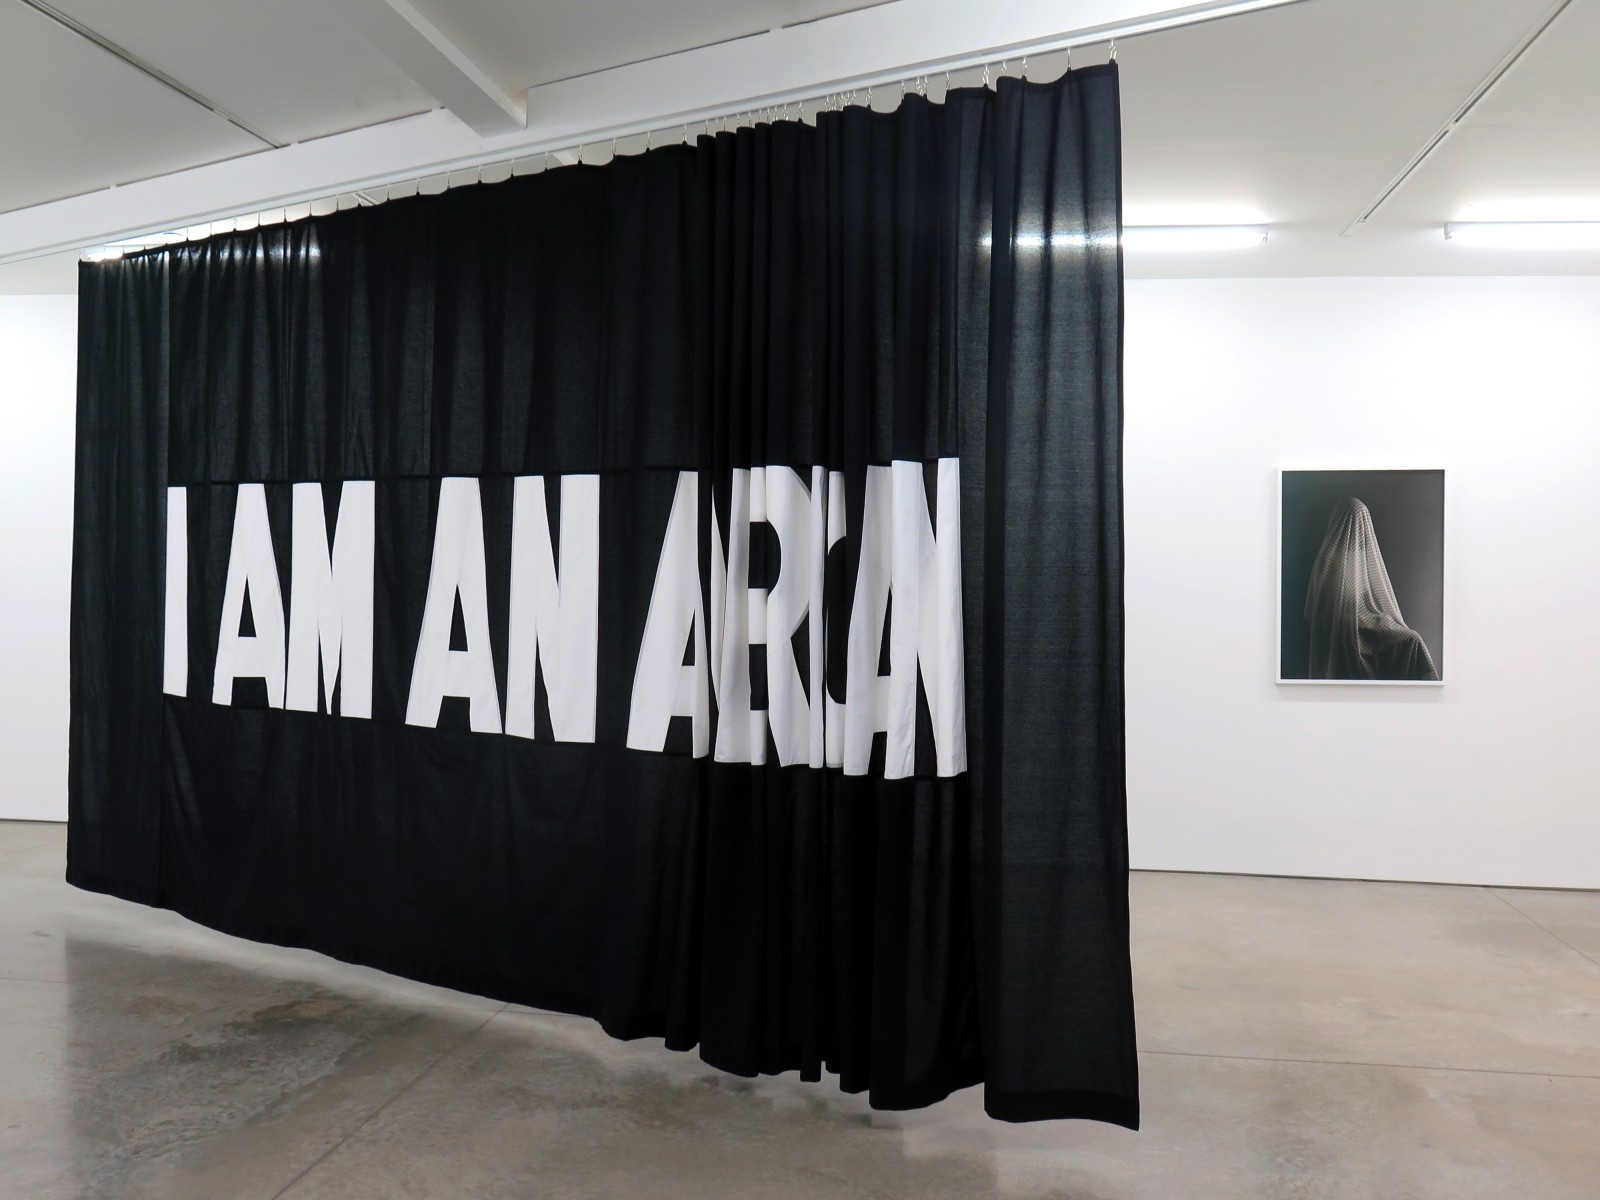 A large, black, fabric banner hanging from the ceiling with white, printed text, "I AM AN AMERICAN."